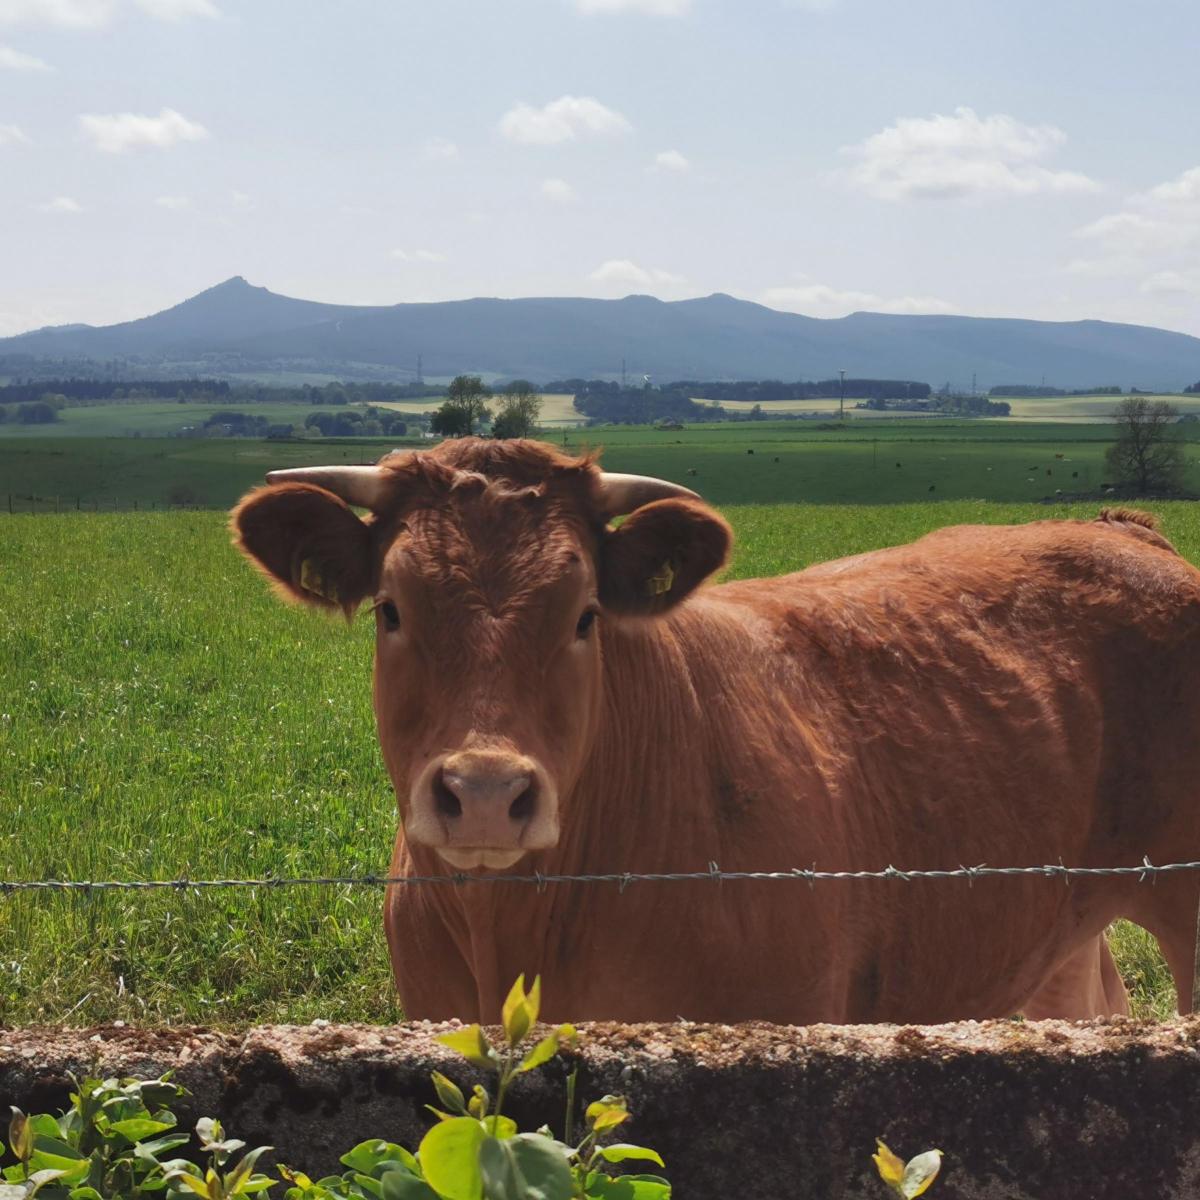 Vivian Singer - Photo taken at my parents farm in Aberdeenshire. 'Scruff' the very friendly bullock looking for a treat. Beautiful Bennachie in the background.